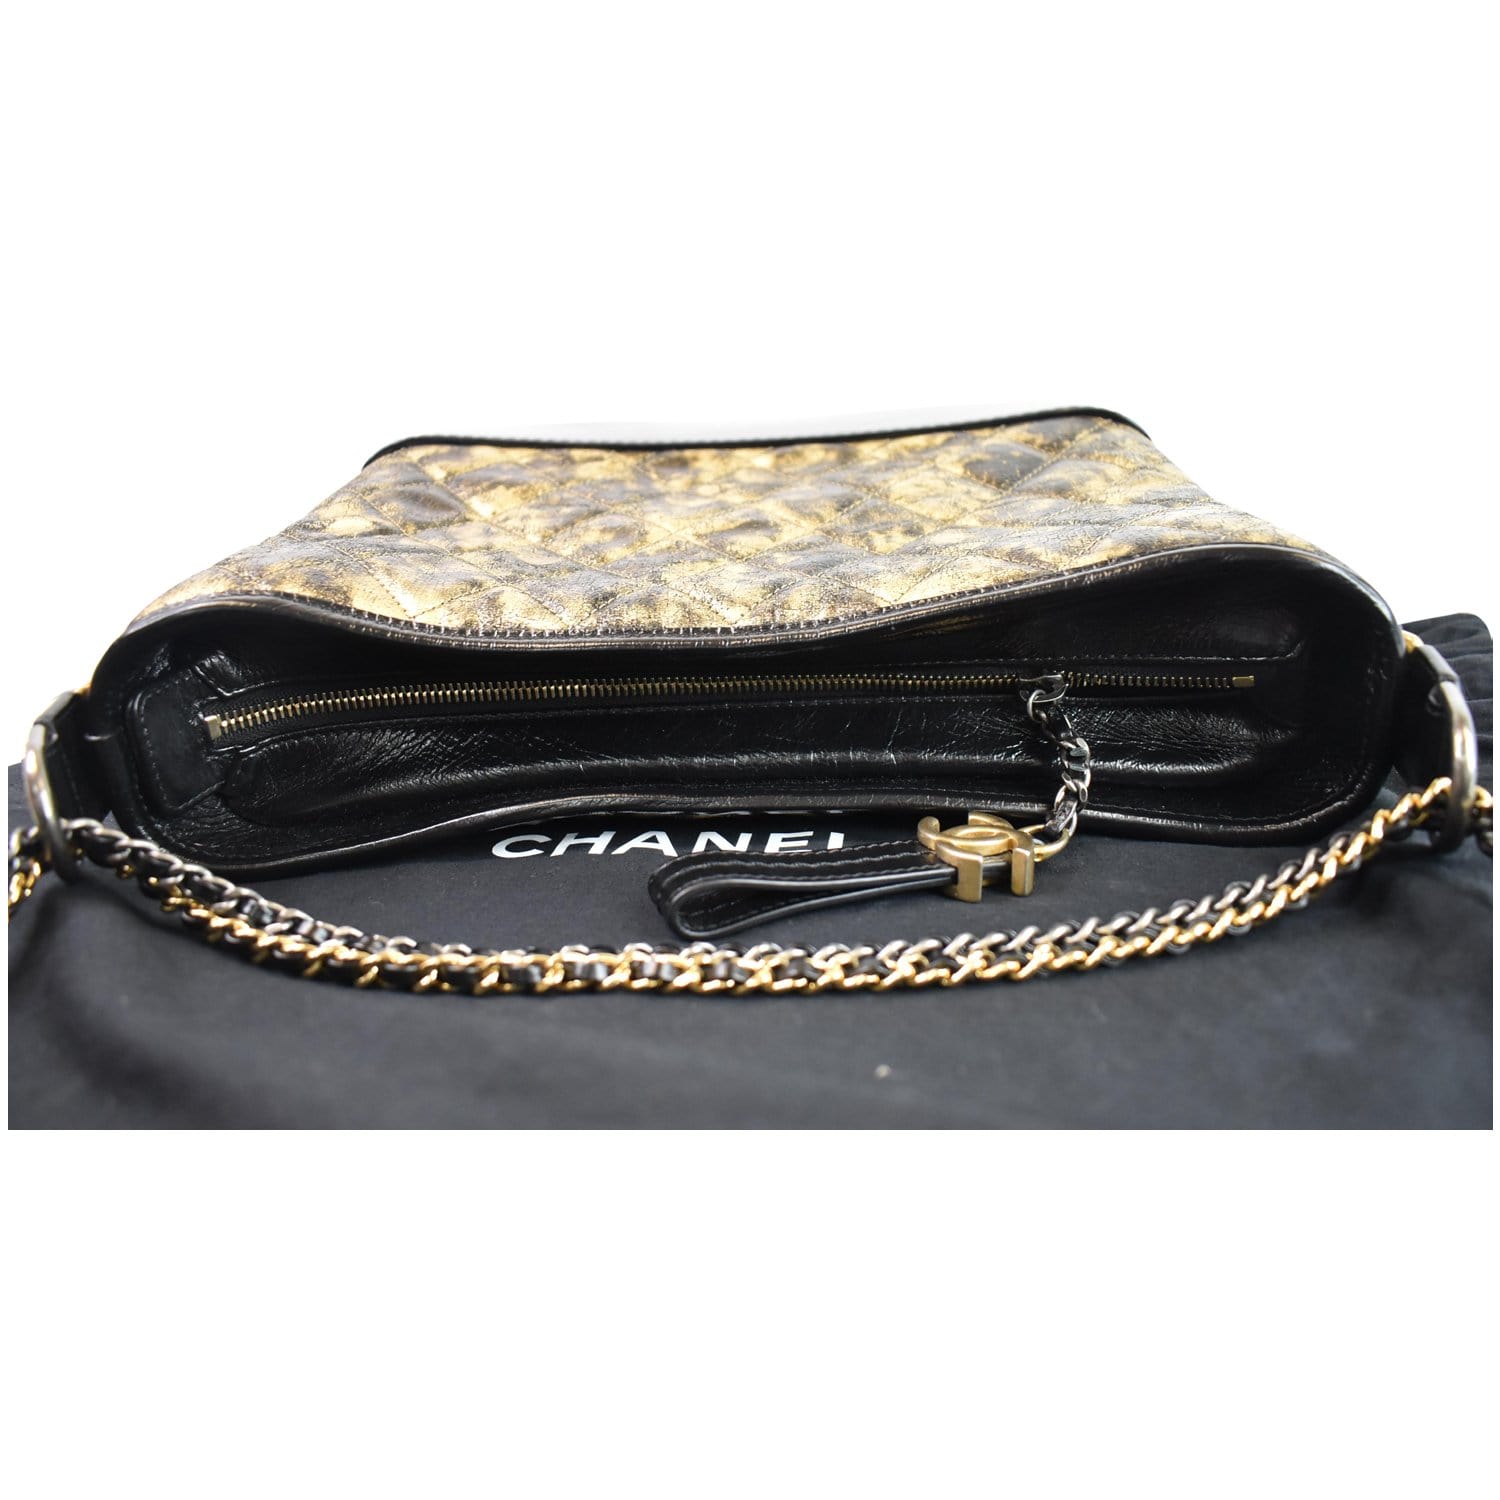 CHANEL, BLACK CRINKLED LEATHER AND GOLD-TONE METAL 2.55 REISSUE SHOULDER  BAG, Chanel: Handbags and Accessories, 2020